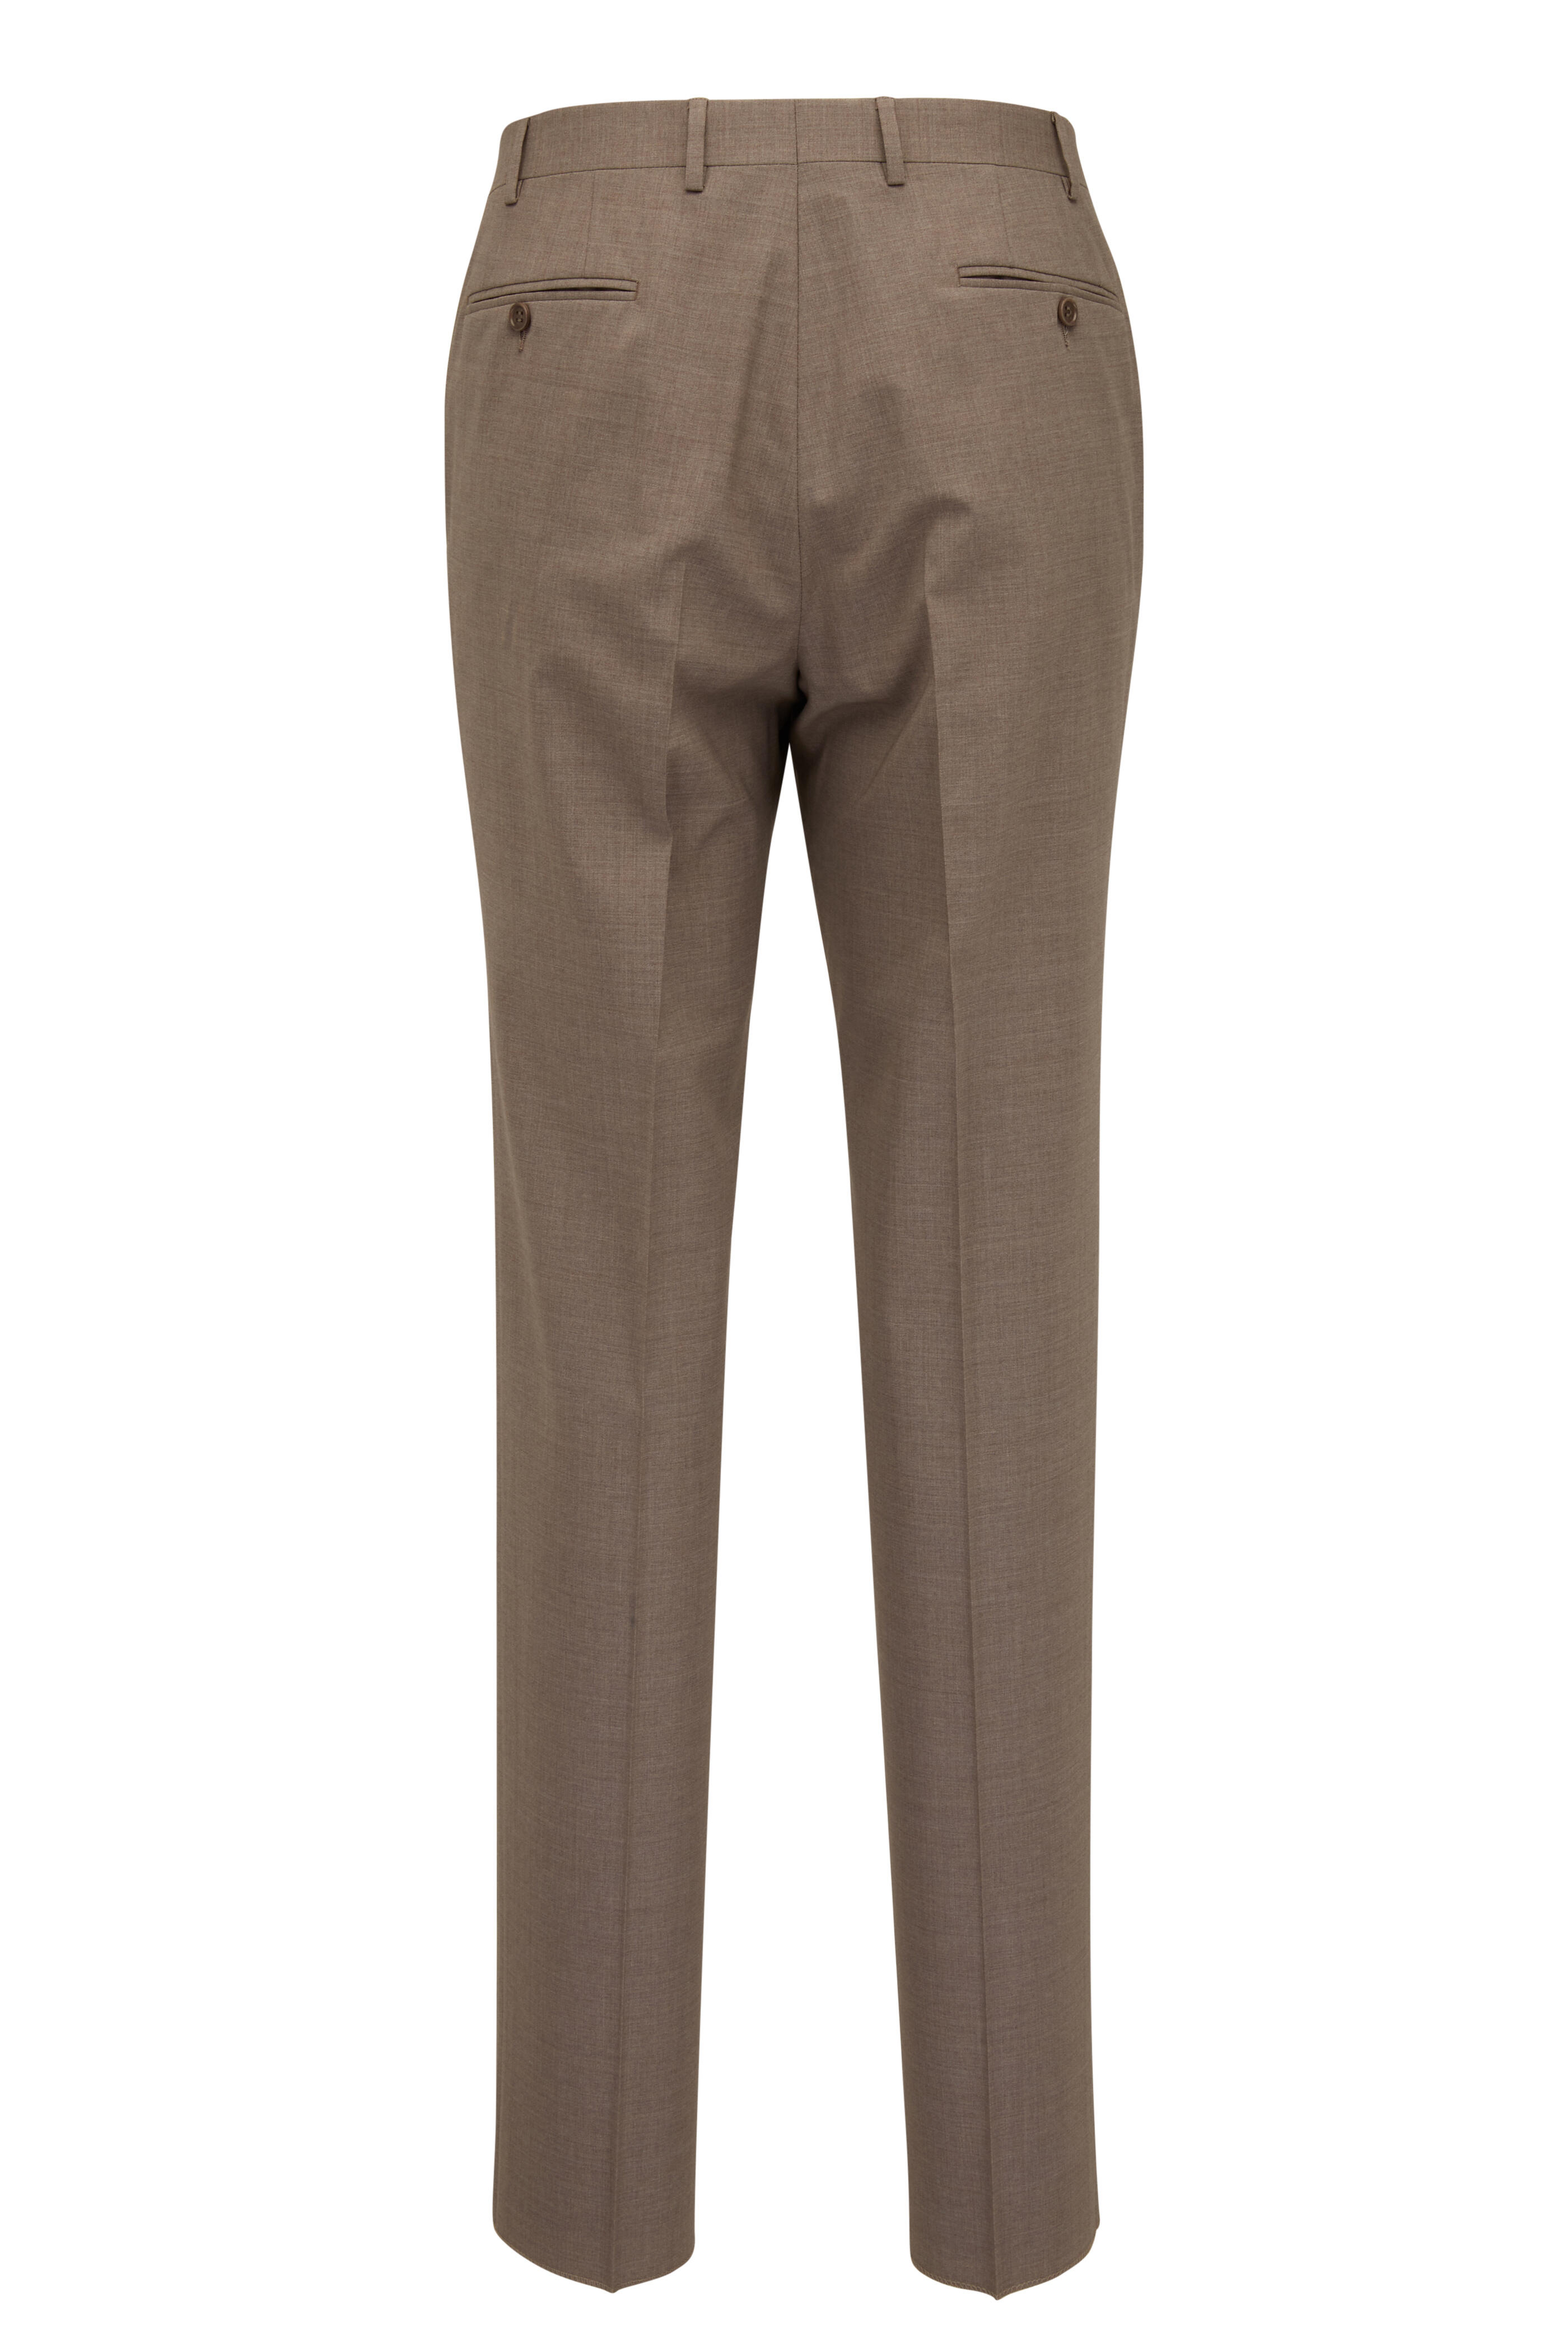 Canali - Light Brown Natural Stretch Wool Pant | Mitchell Stores